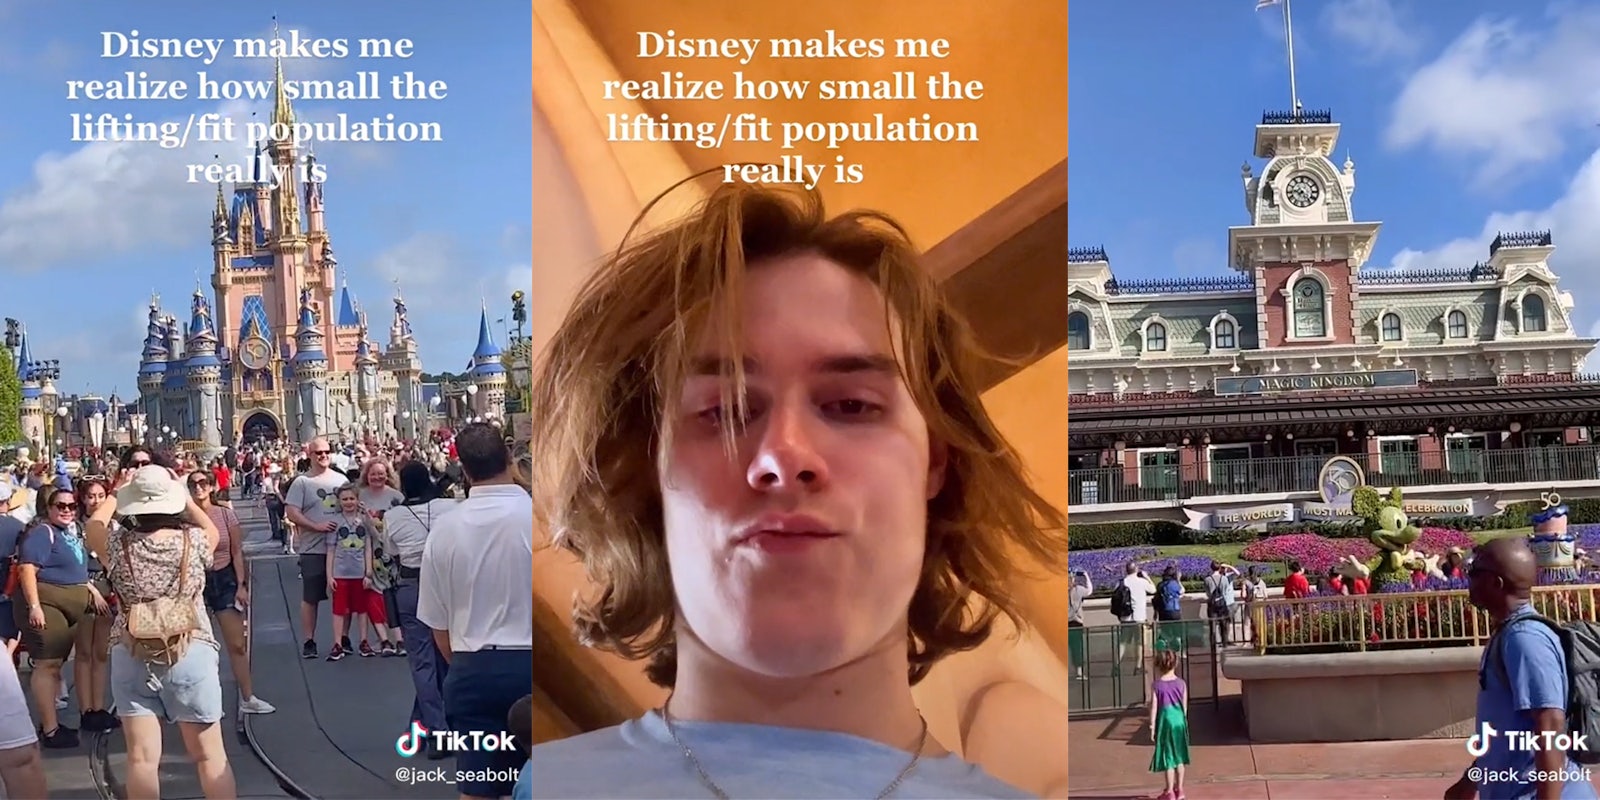 Magic Kingdom (l&r) young man with 'Disney makes me realize how small the lifting/fit population really is' (c)